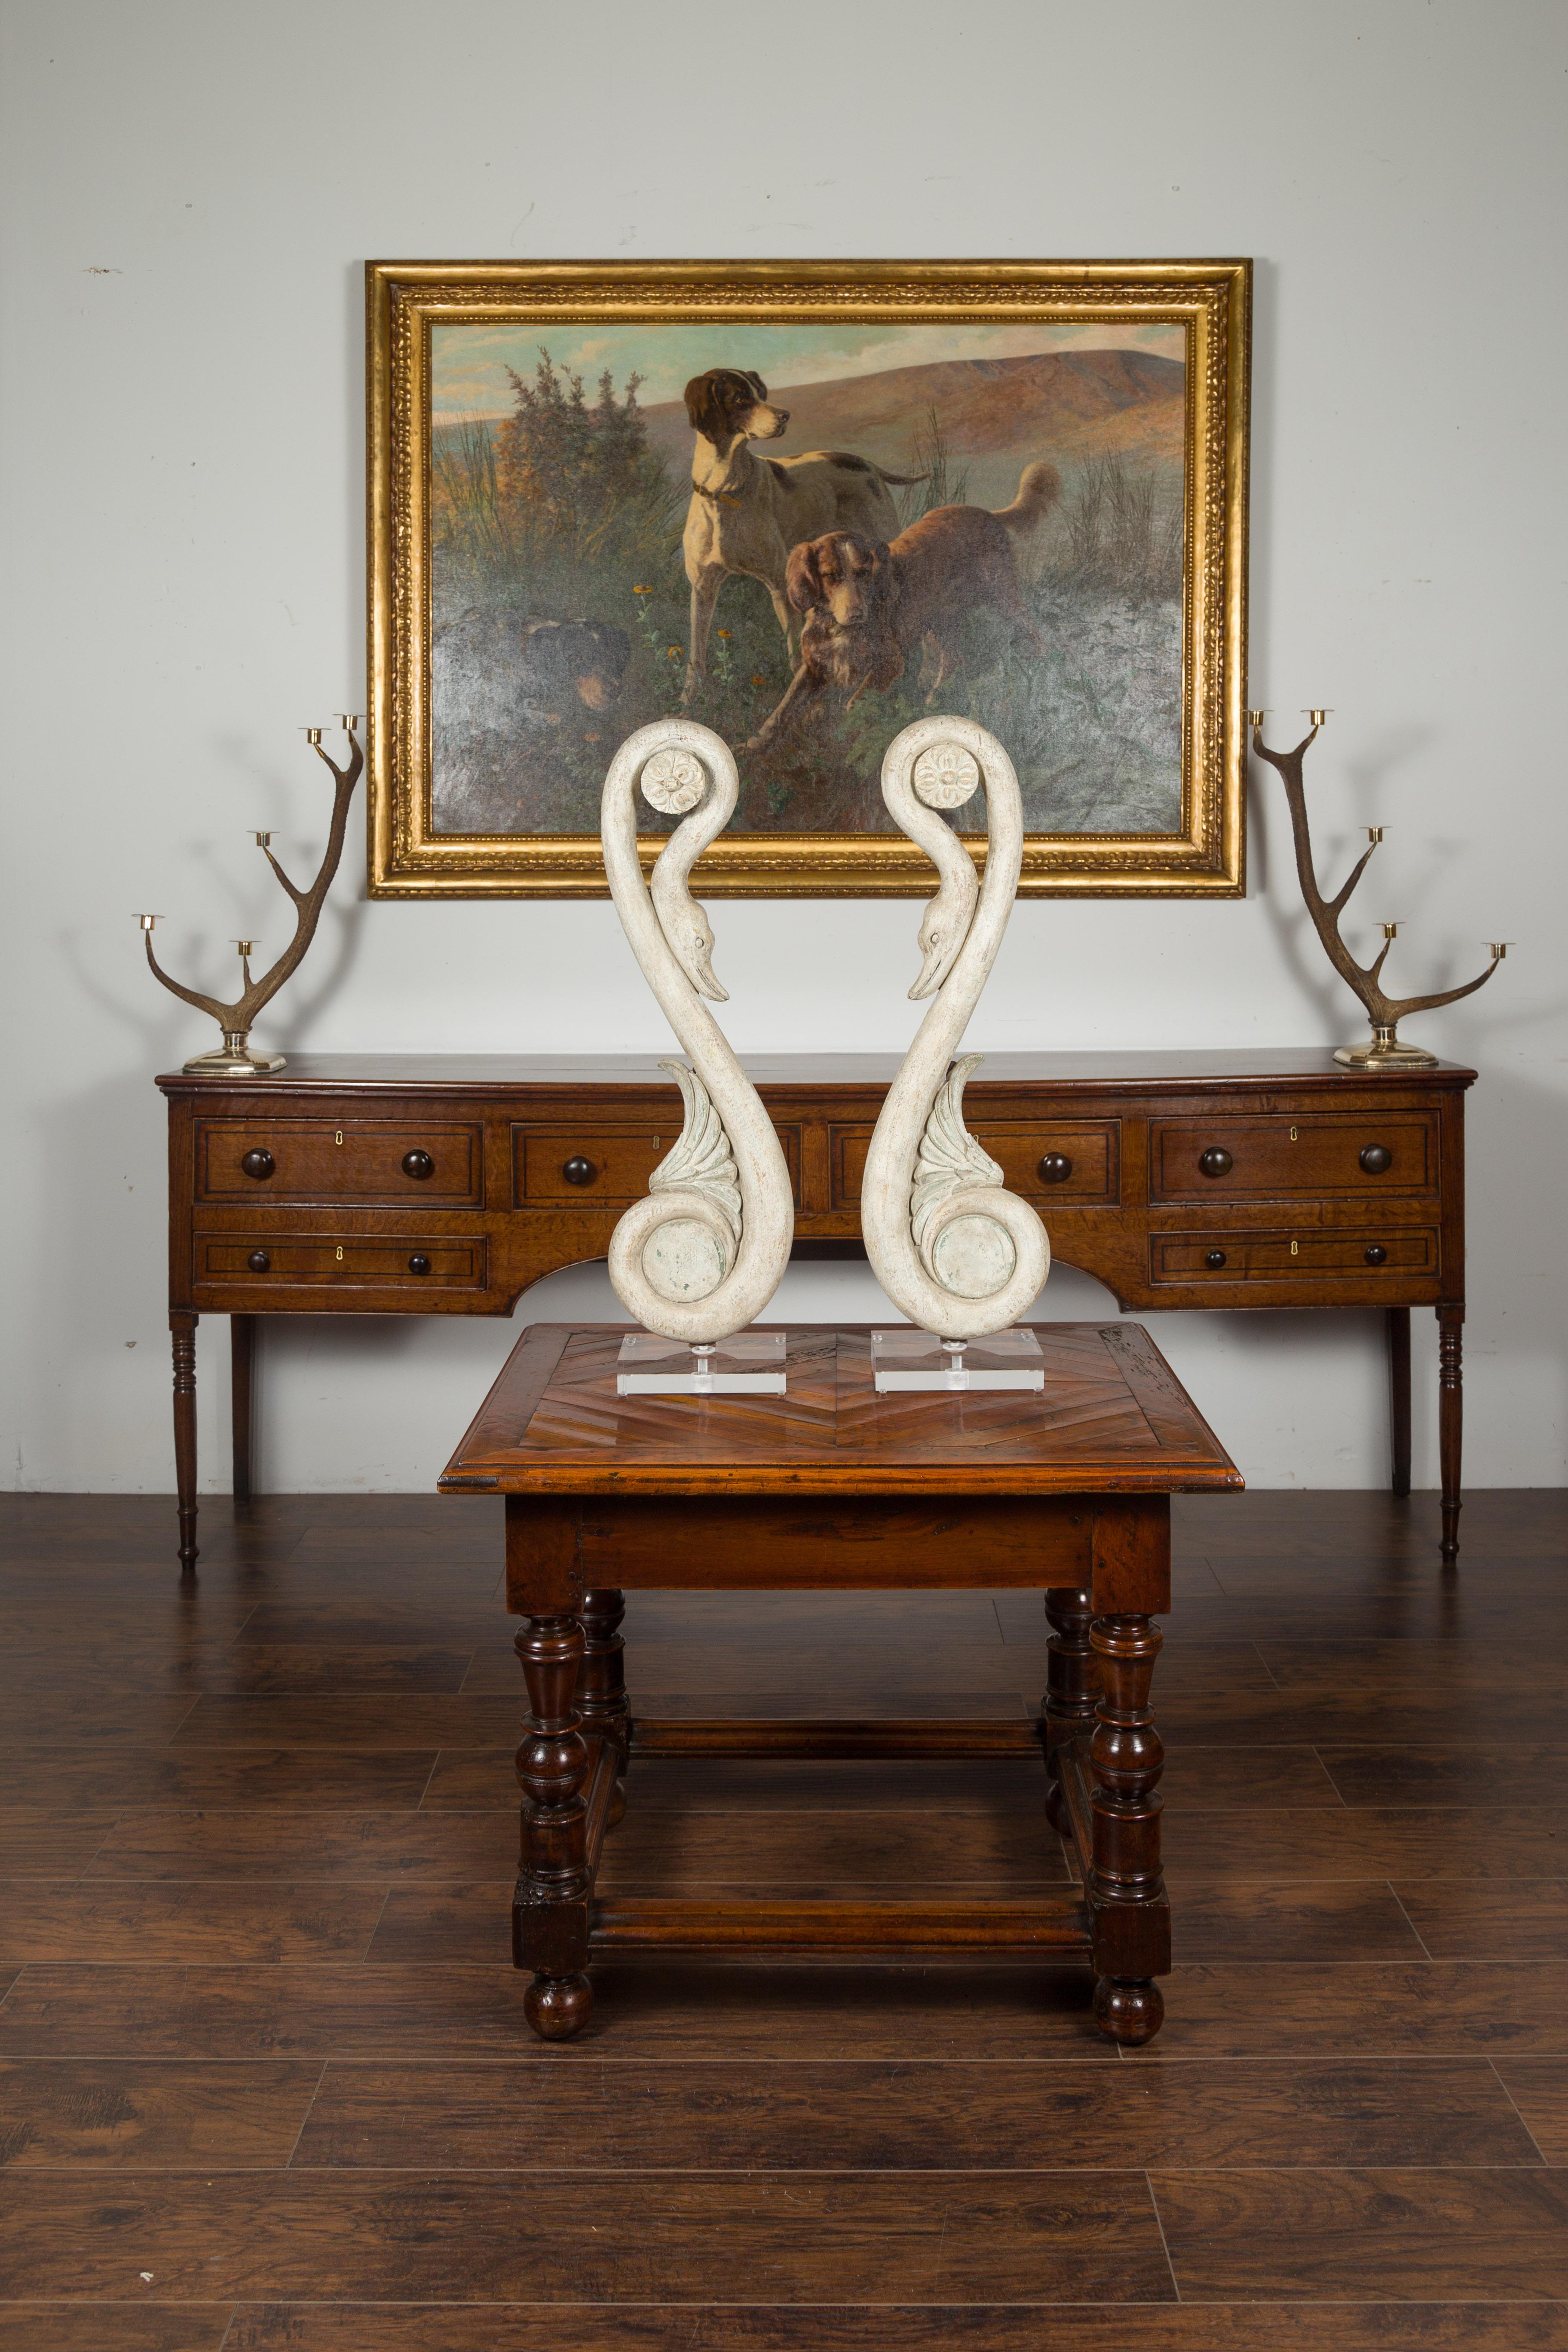 Pair of 19th Century Italian Carved Swan Fragments Mounted on Custom Lucite In Good Condition For Sale In Atlanta, GA